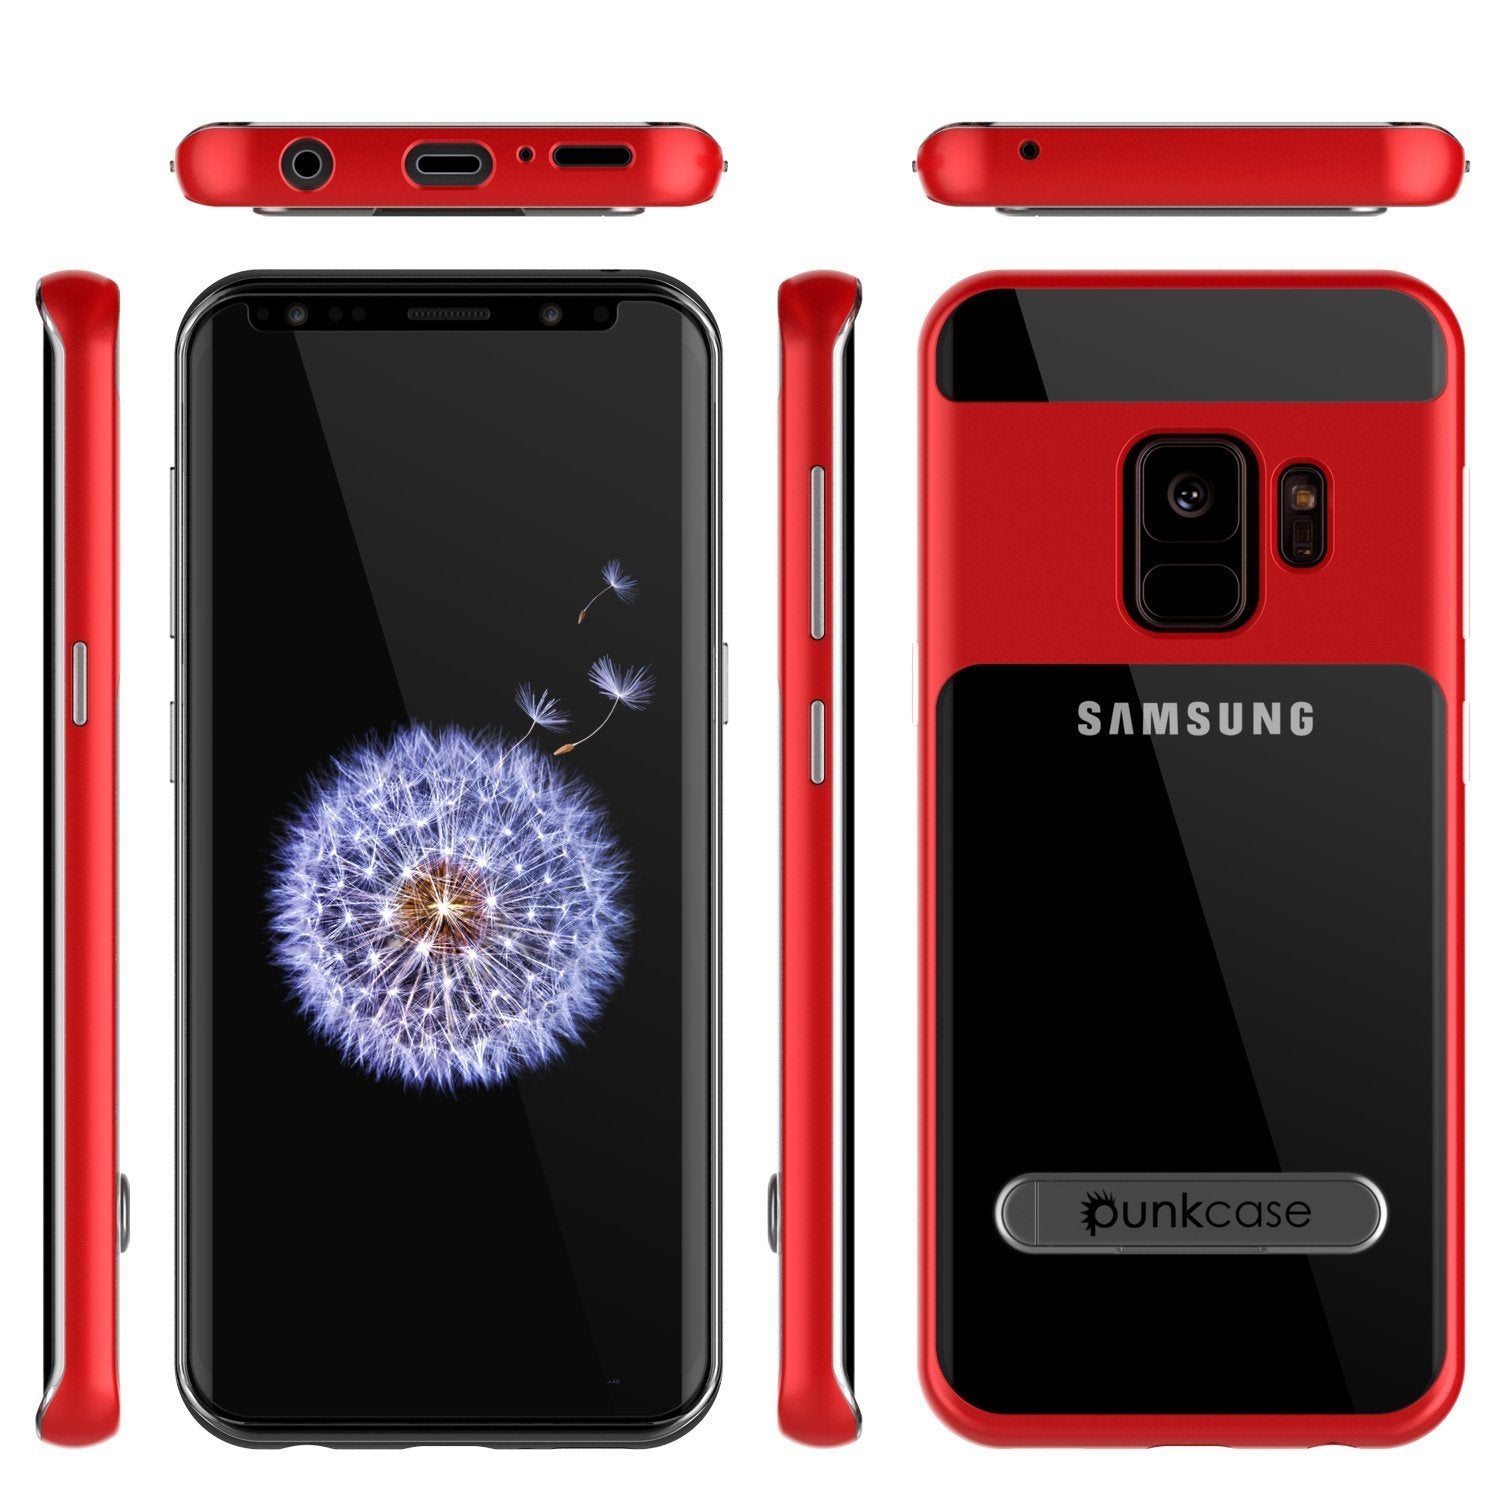 Galaxy S9 Punkcase, LUCID 3.0 Series Cover w/Kickstand, [Red]